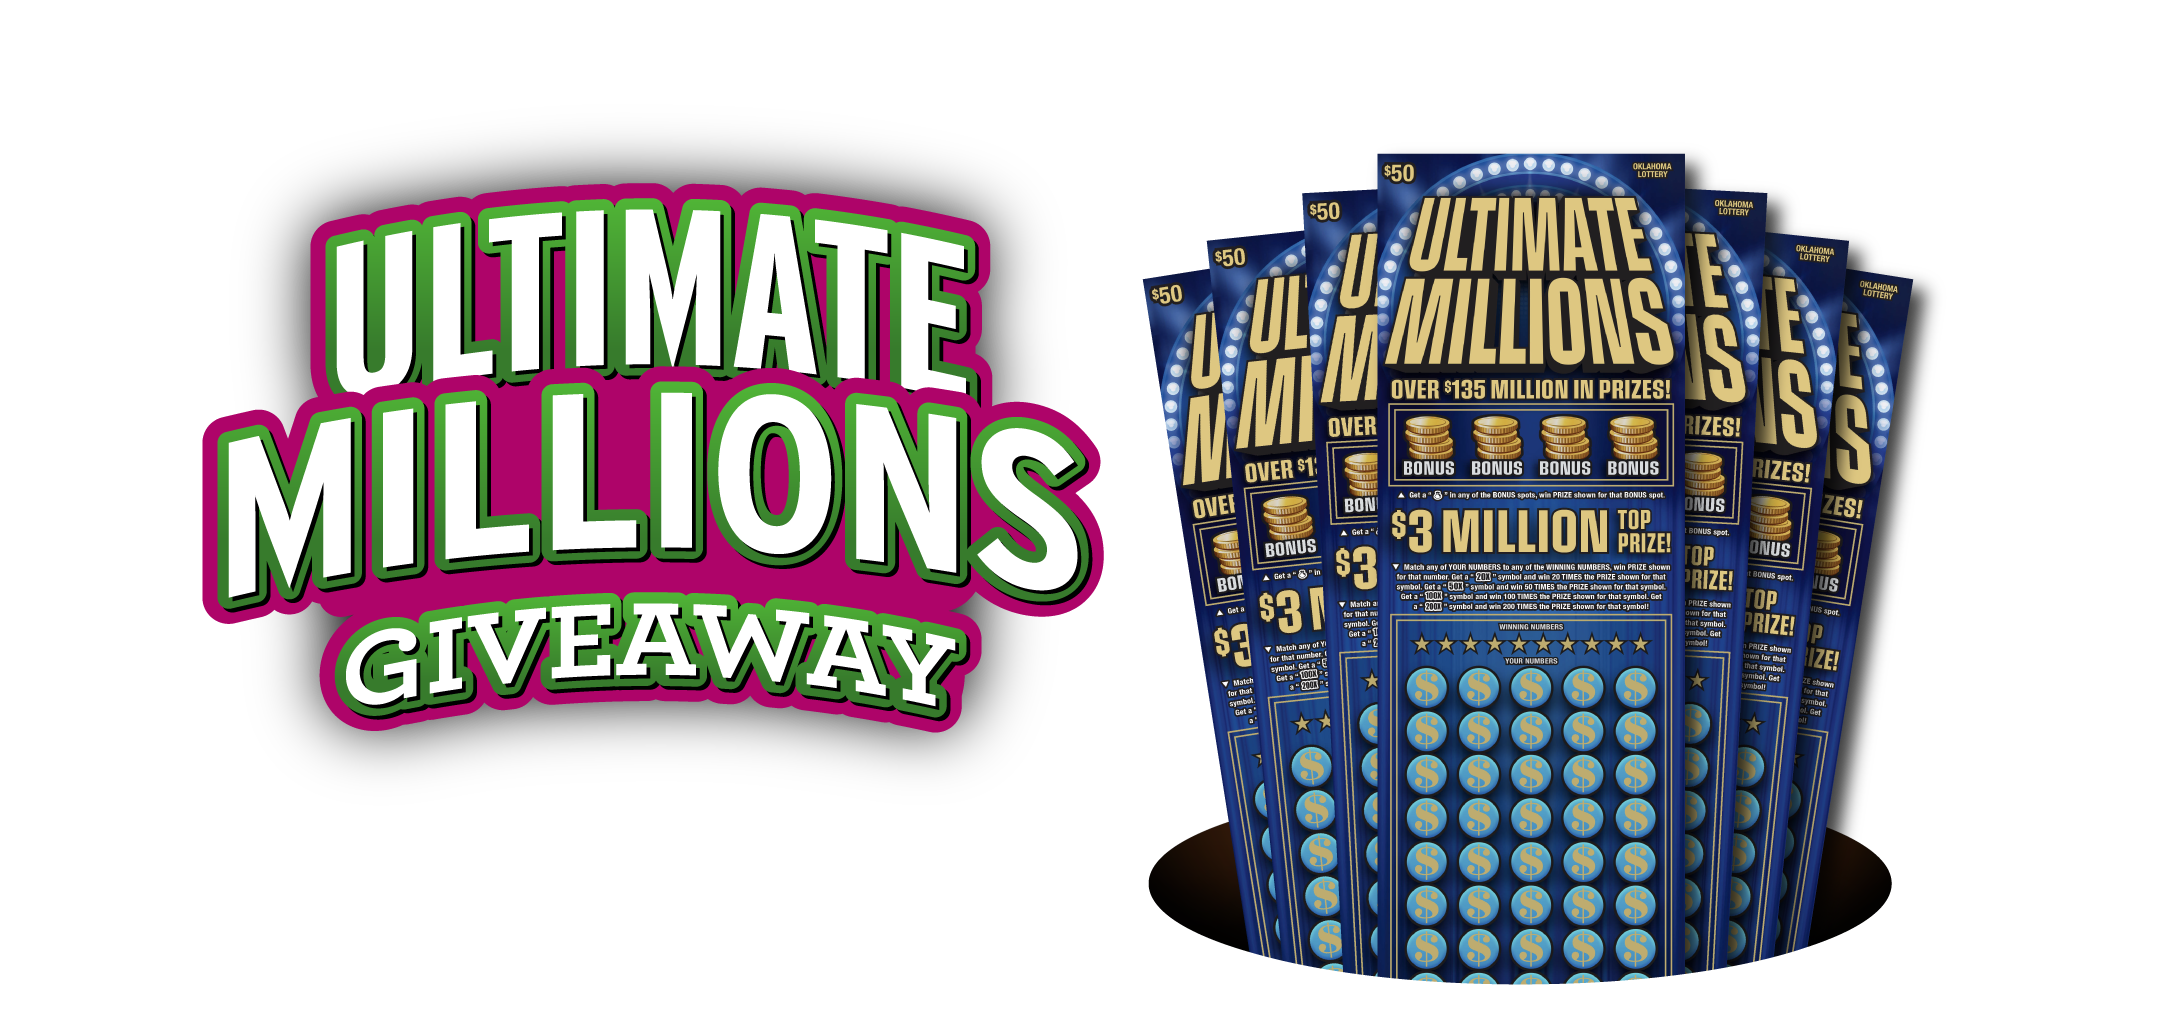 Ultimate Millions Giveaway